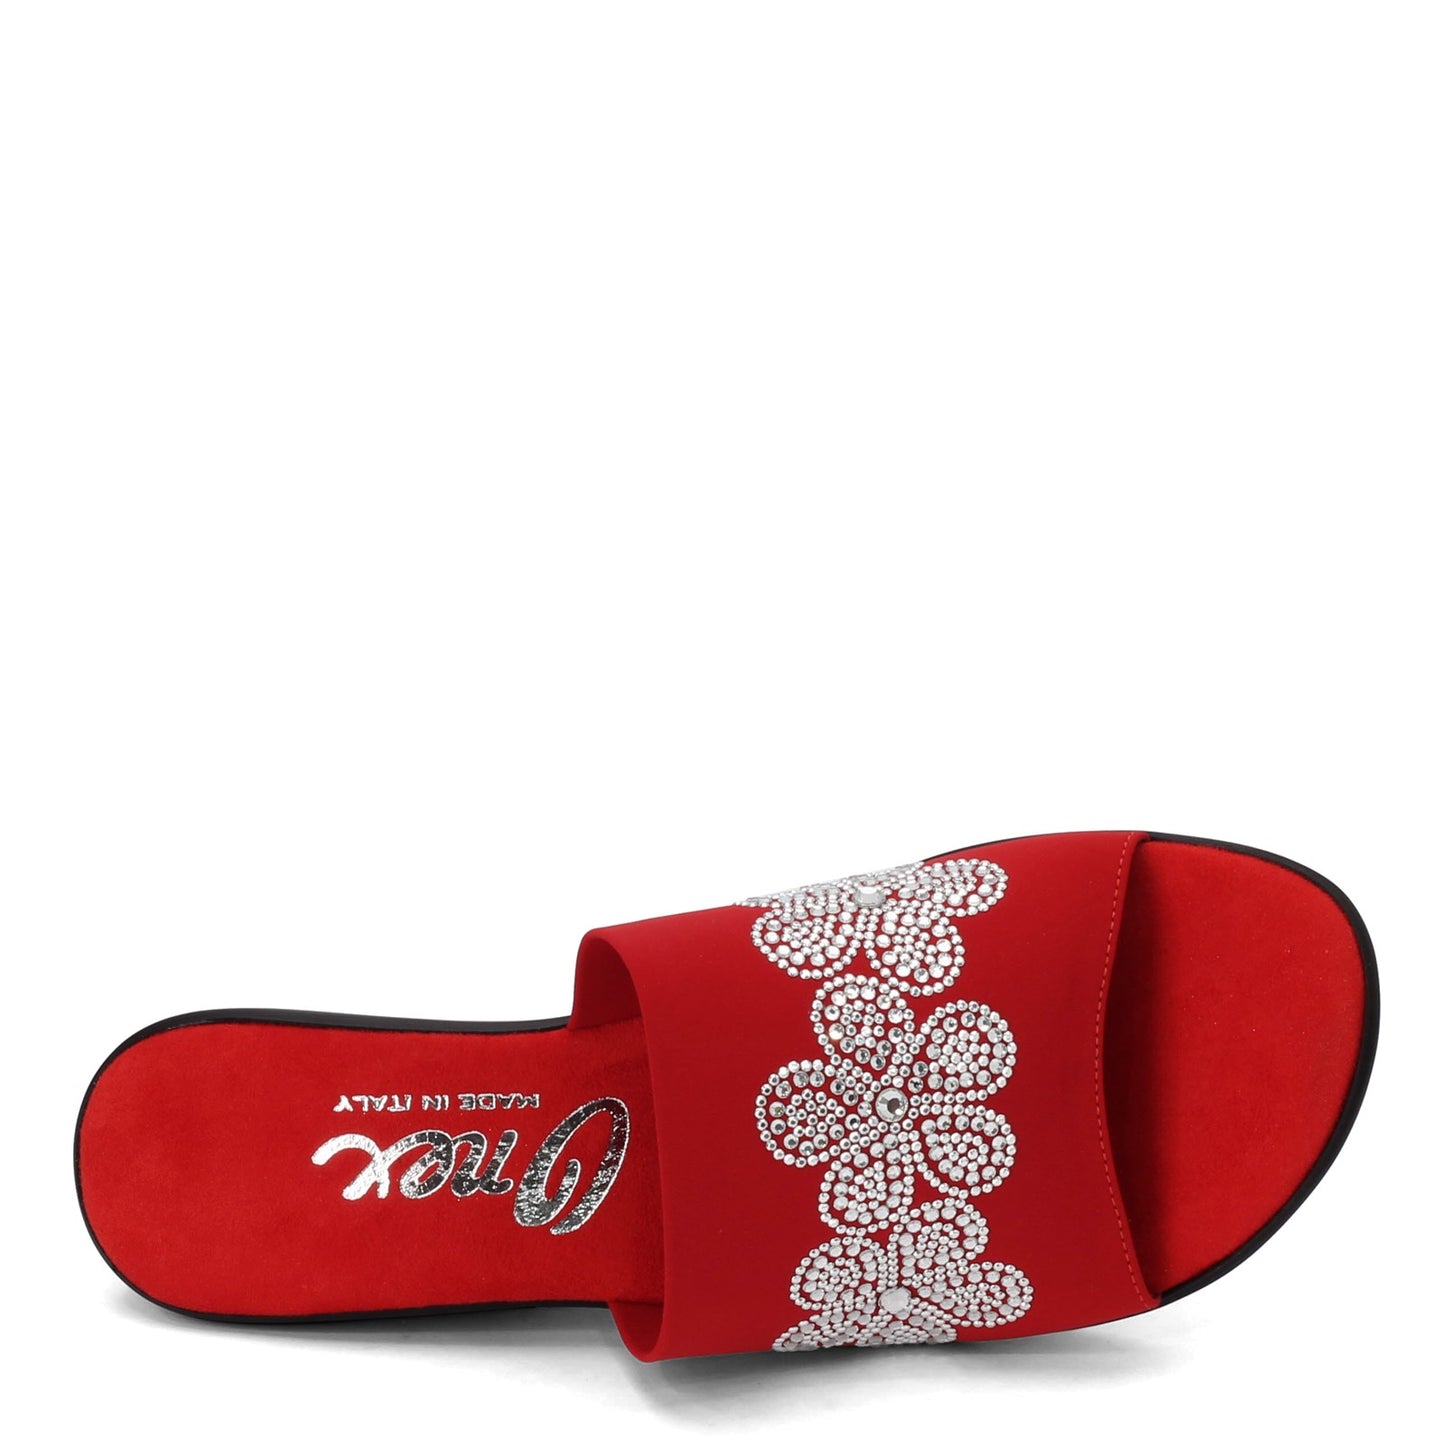 Peltz Shoes  Women's Onex Rory Sandal RED RORY-RED